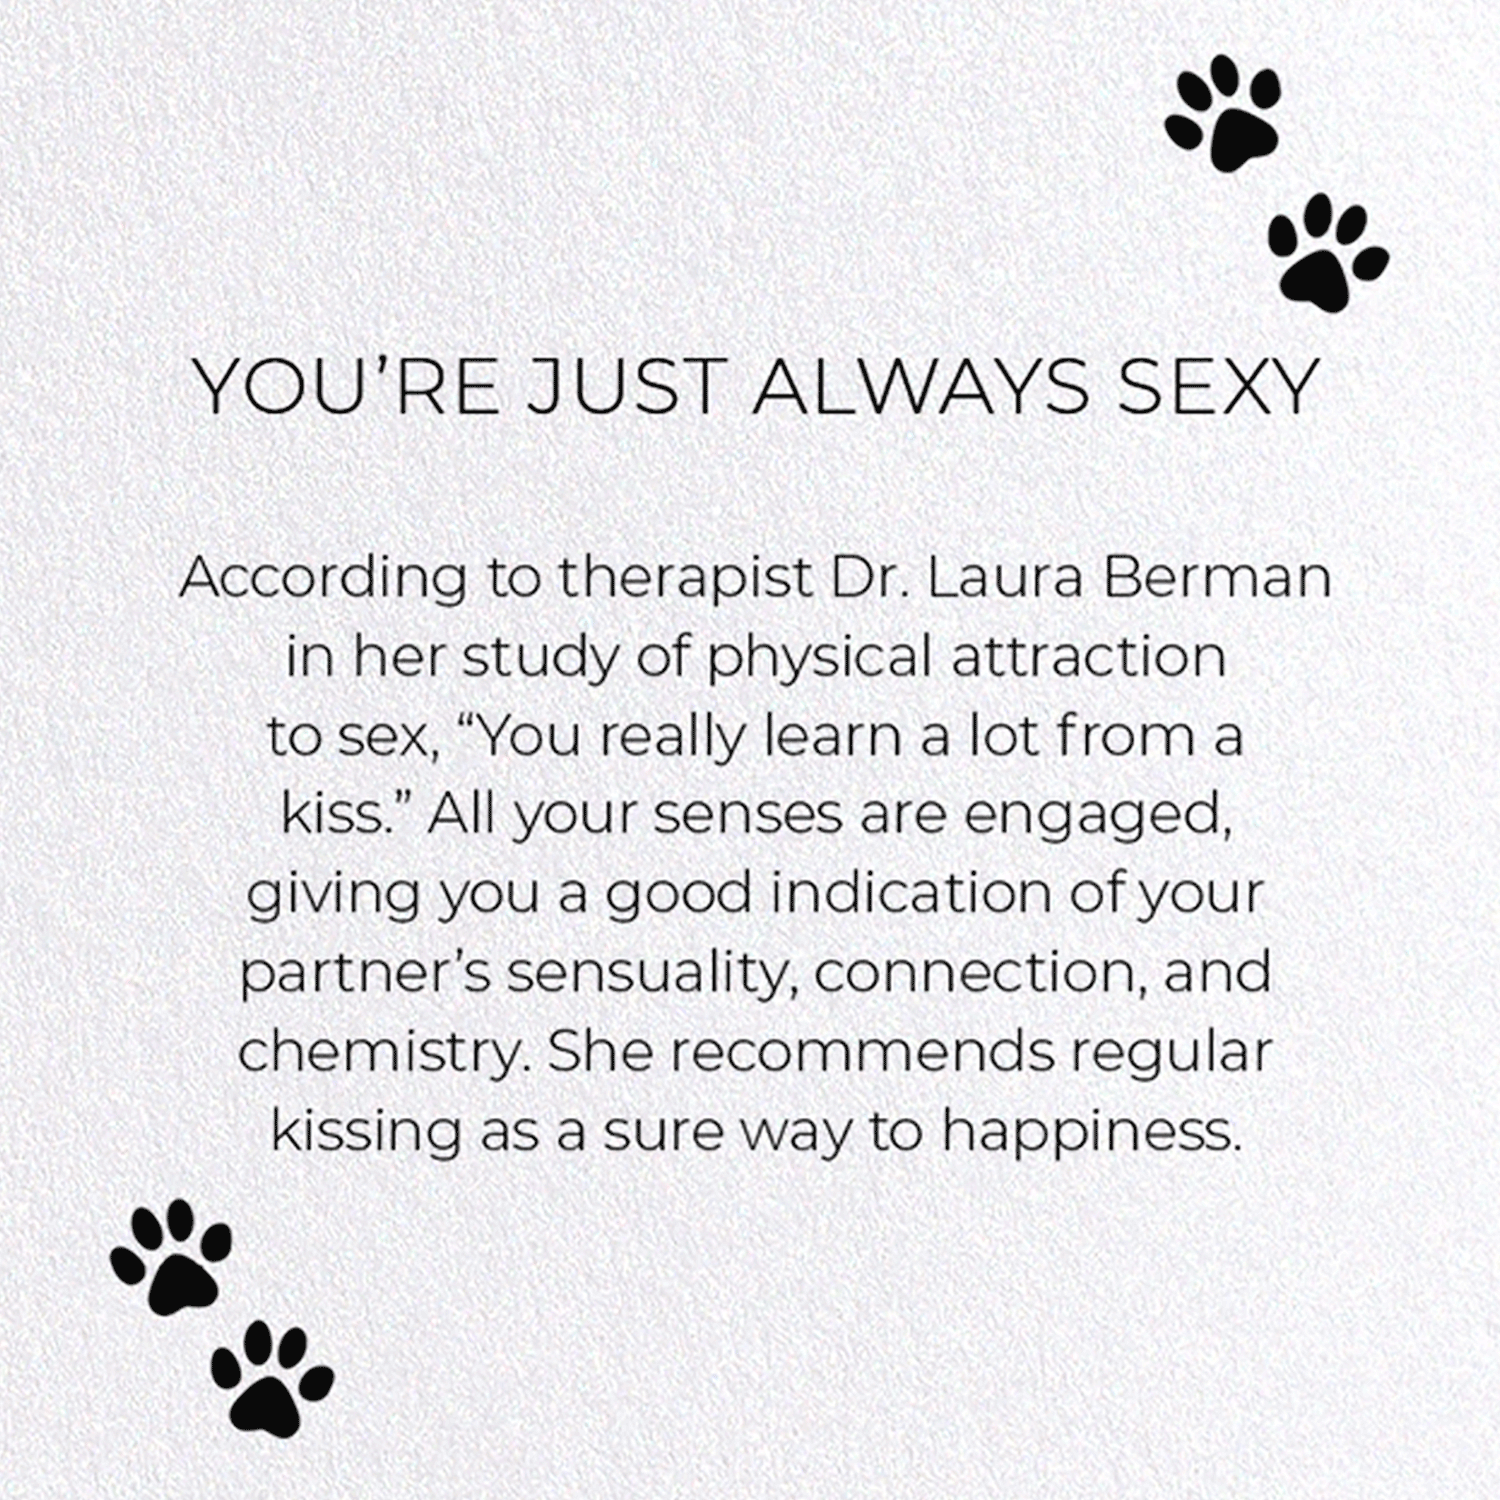 YOU'RE JUST ALWAYS SEXY: Funny Animal Greeting Card